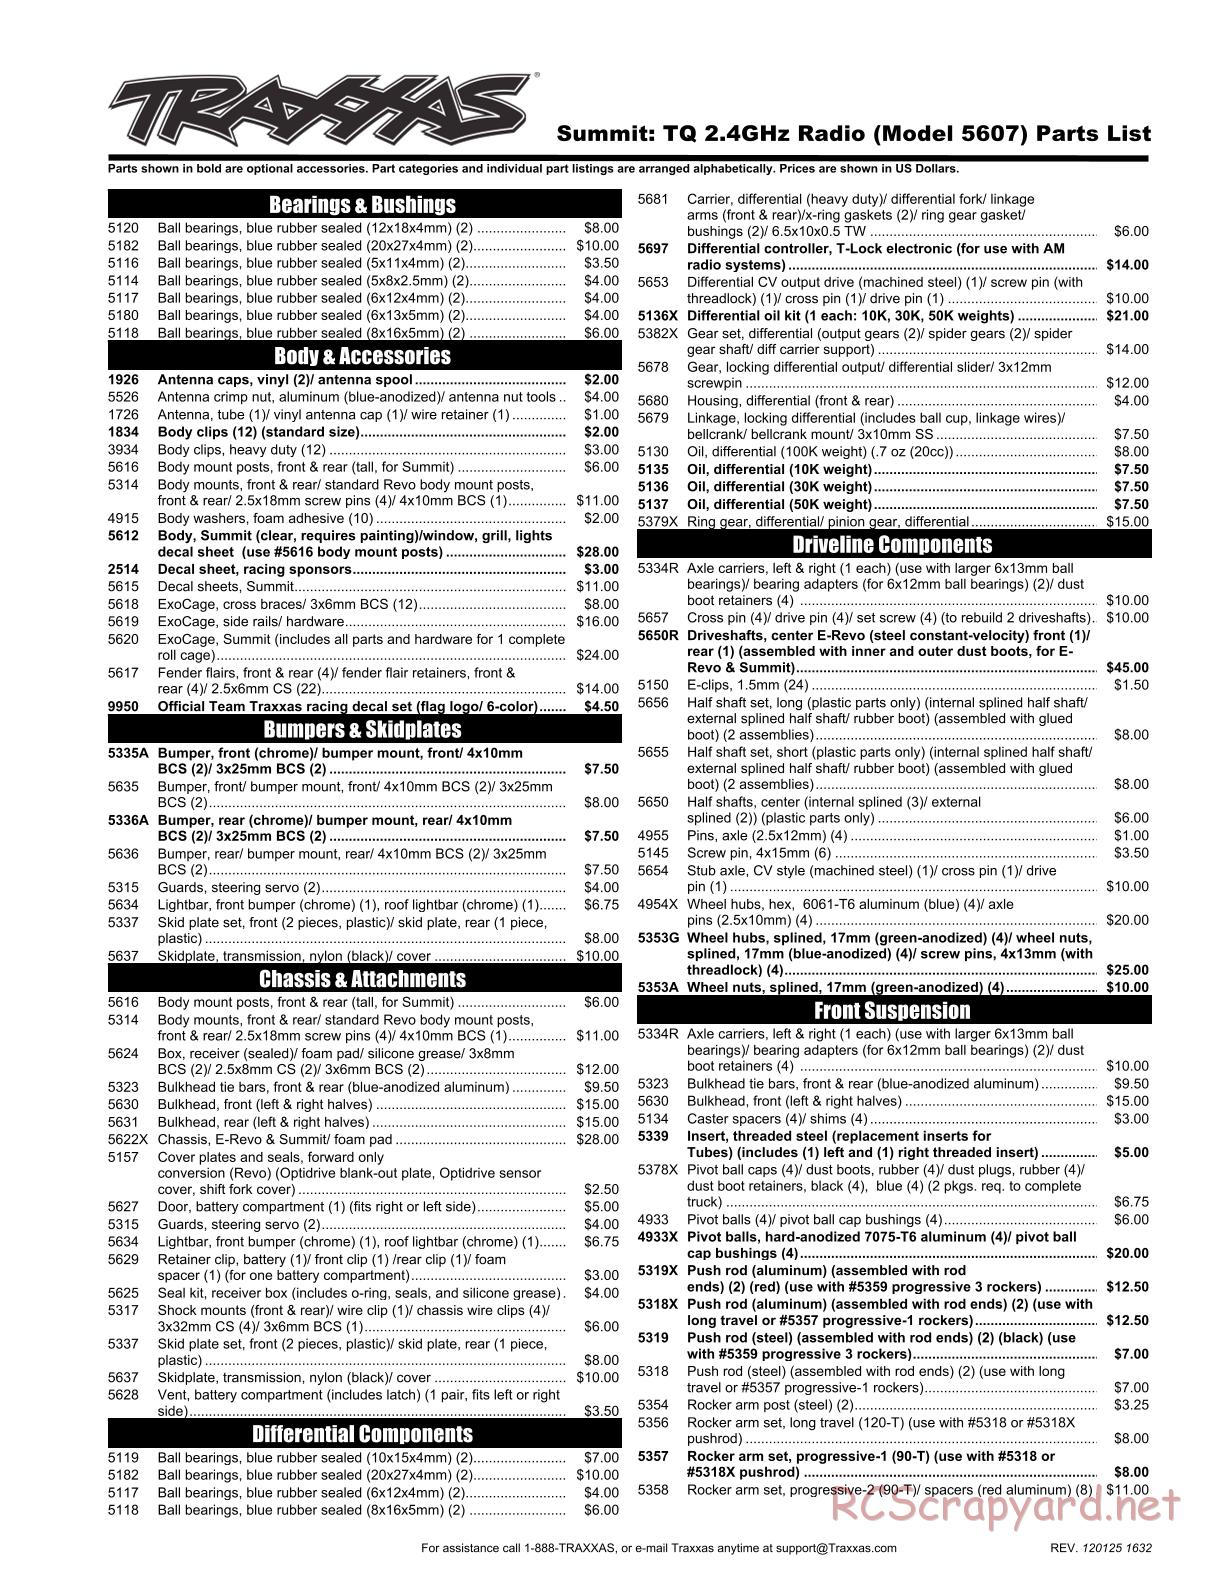 Traxxas - Summit - Parts List - Page 1